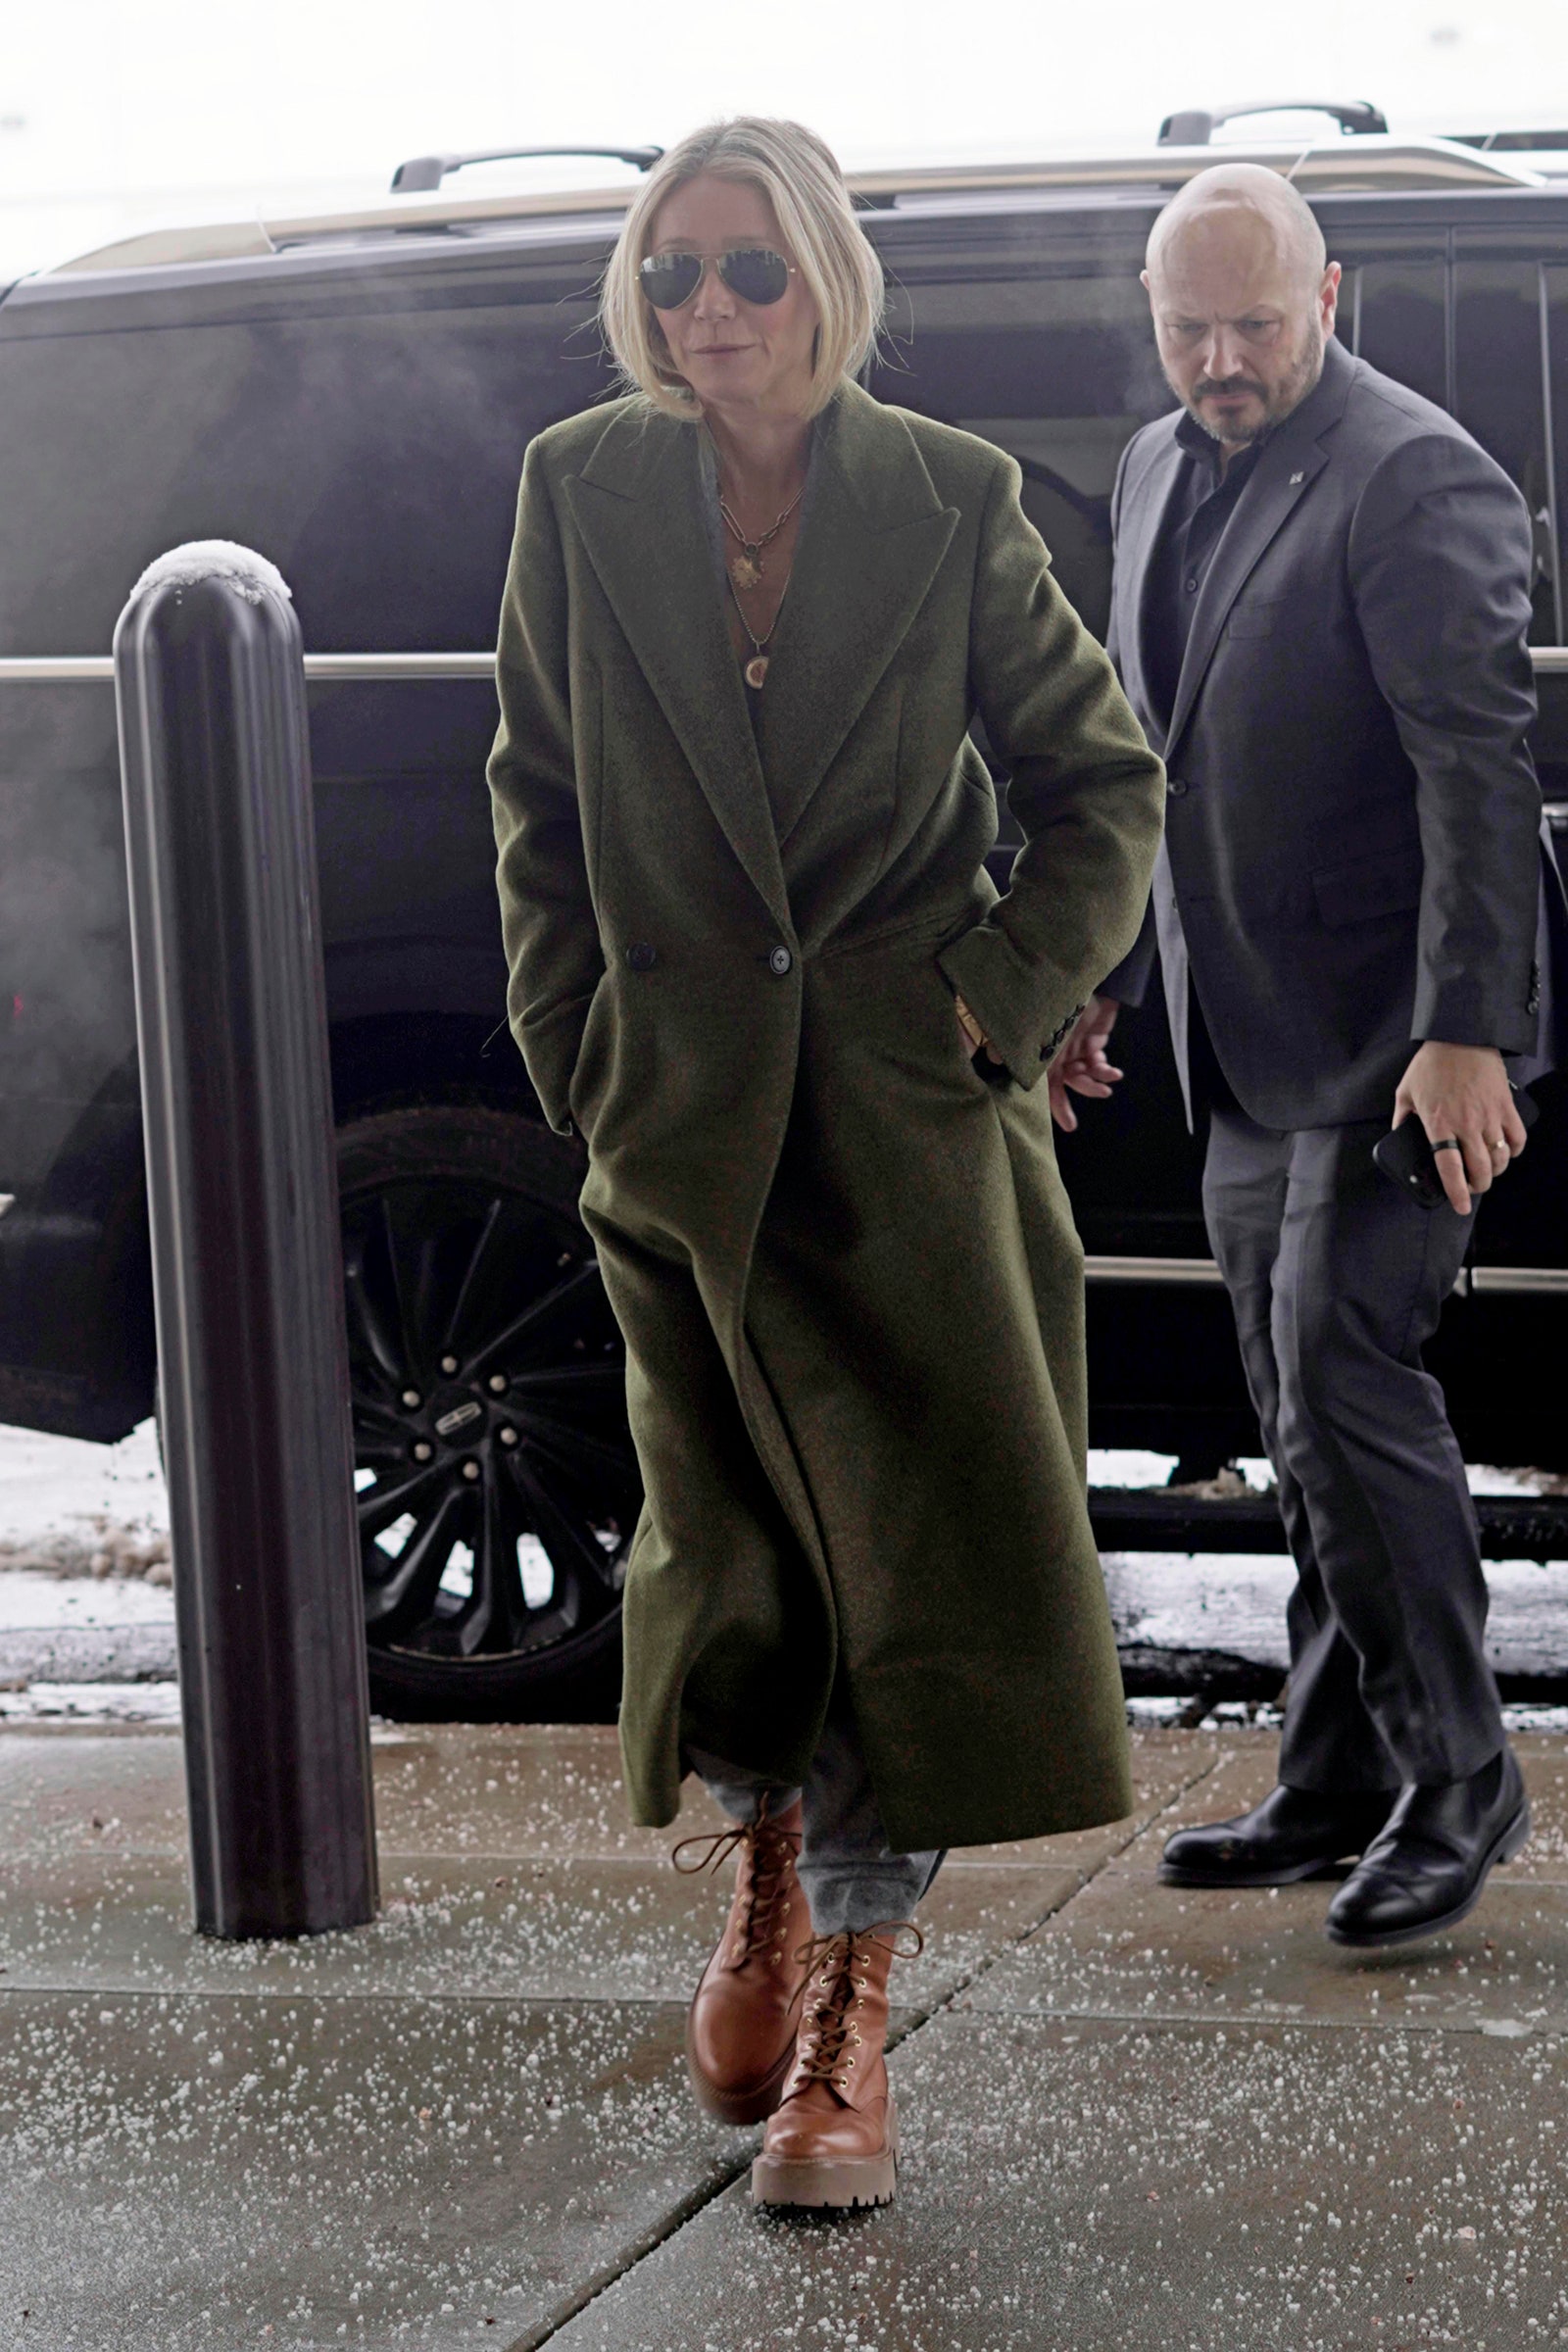 PARK CITY UTAH  MARCH 23 Gwyneth Paltrow is seen arriving at court on March 23 2023 in Park City Utah.